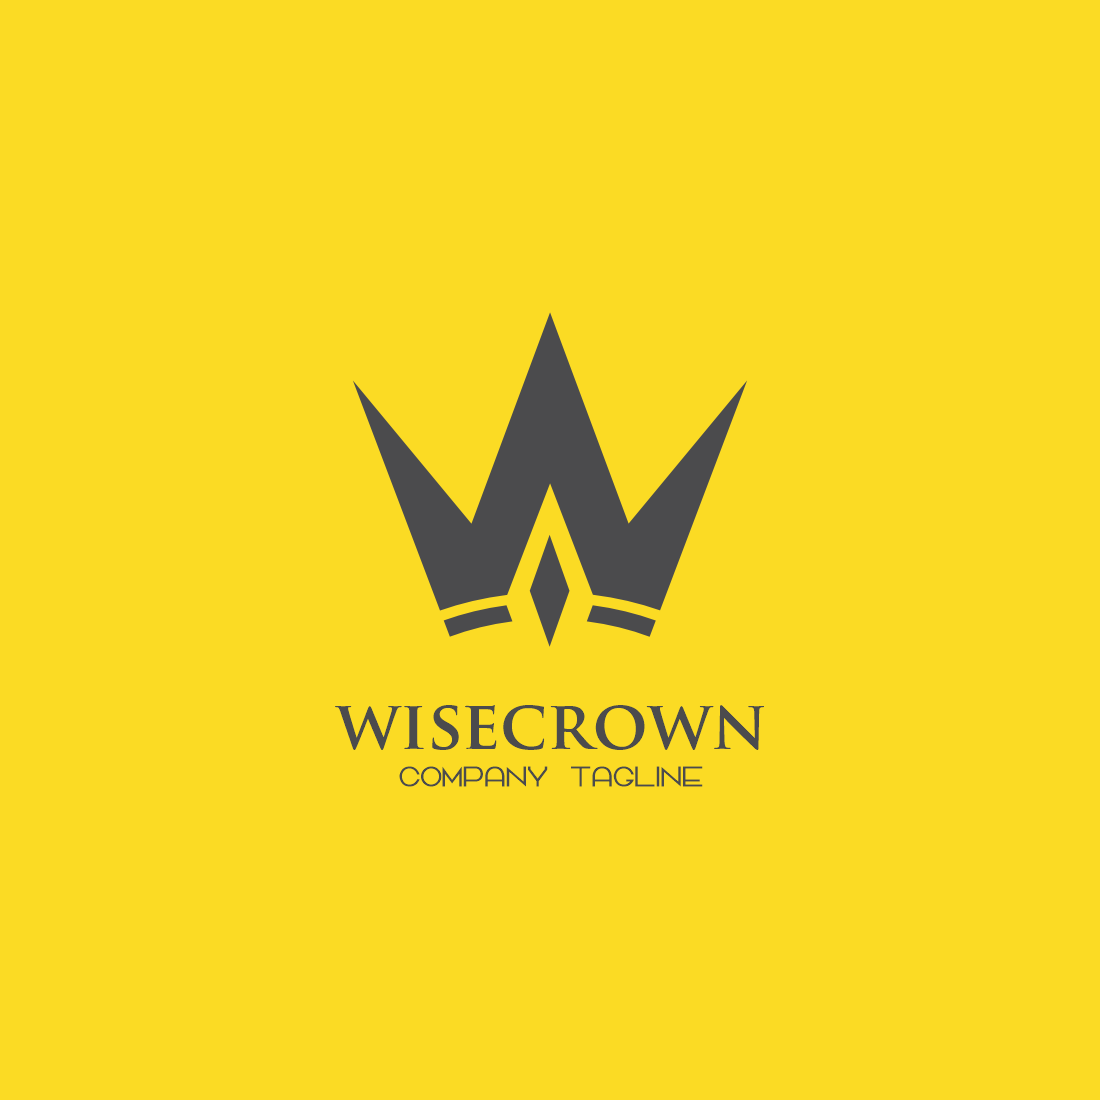 wisecrown 4 729